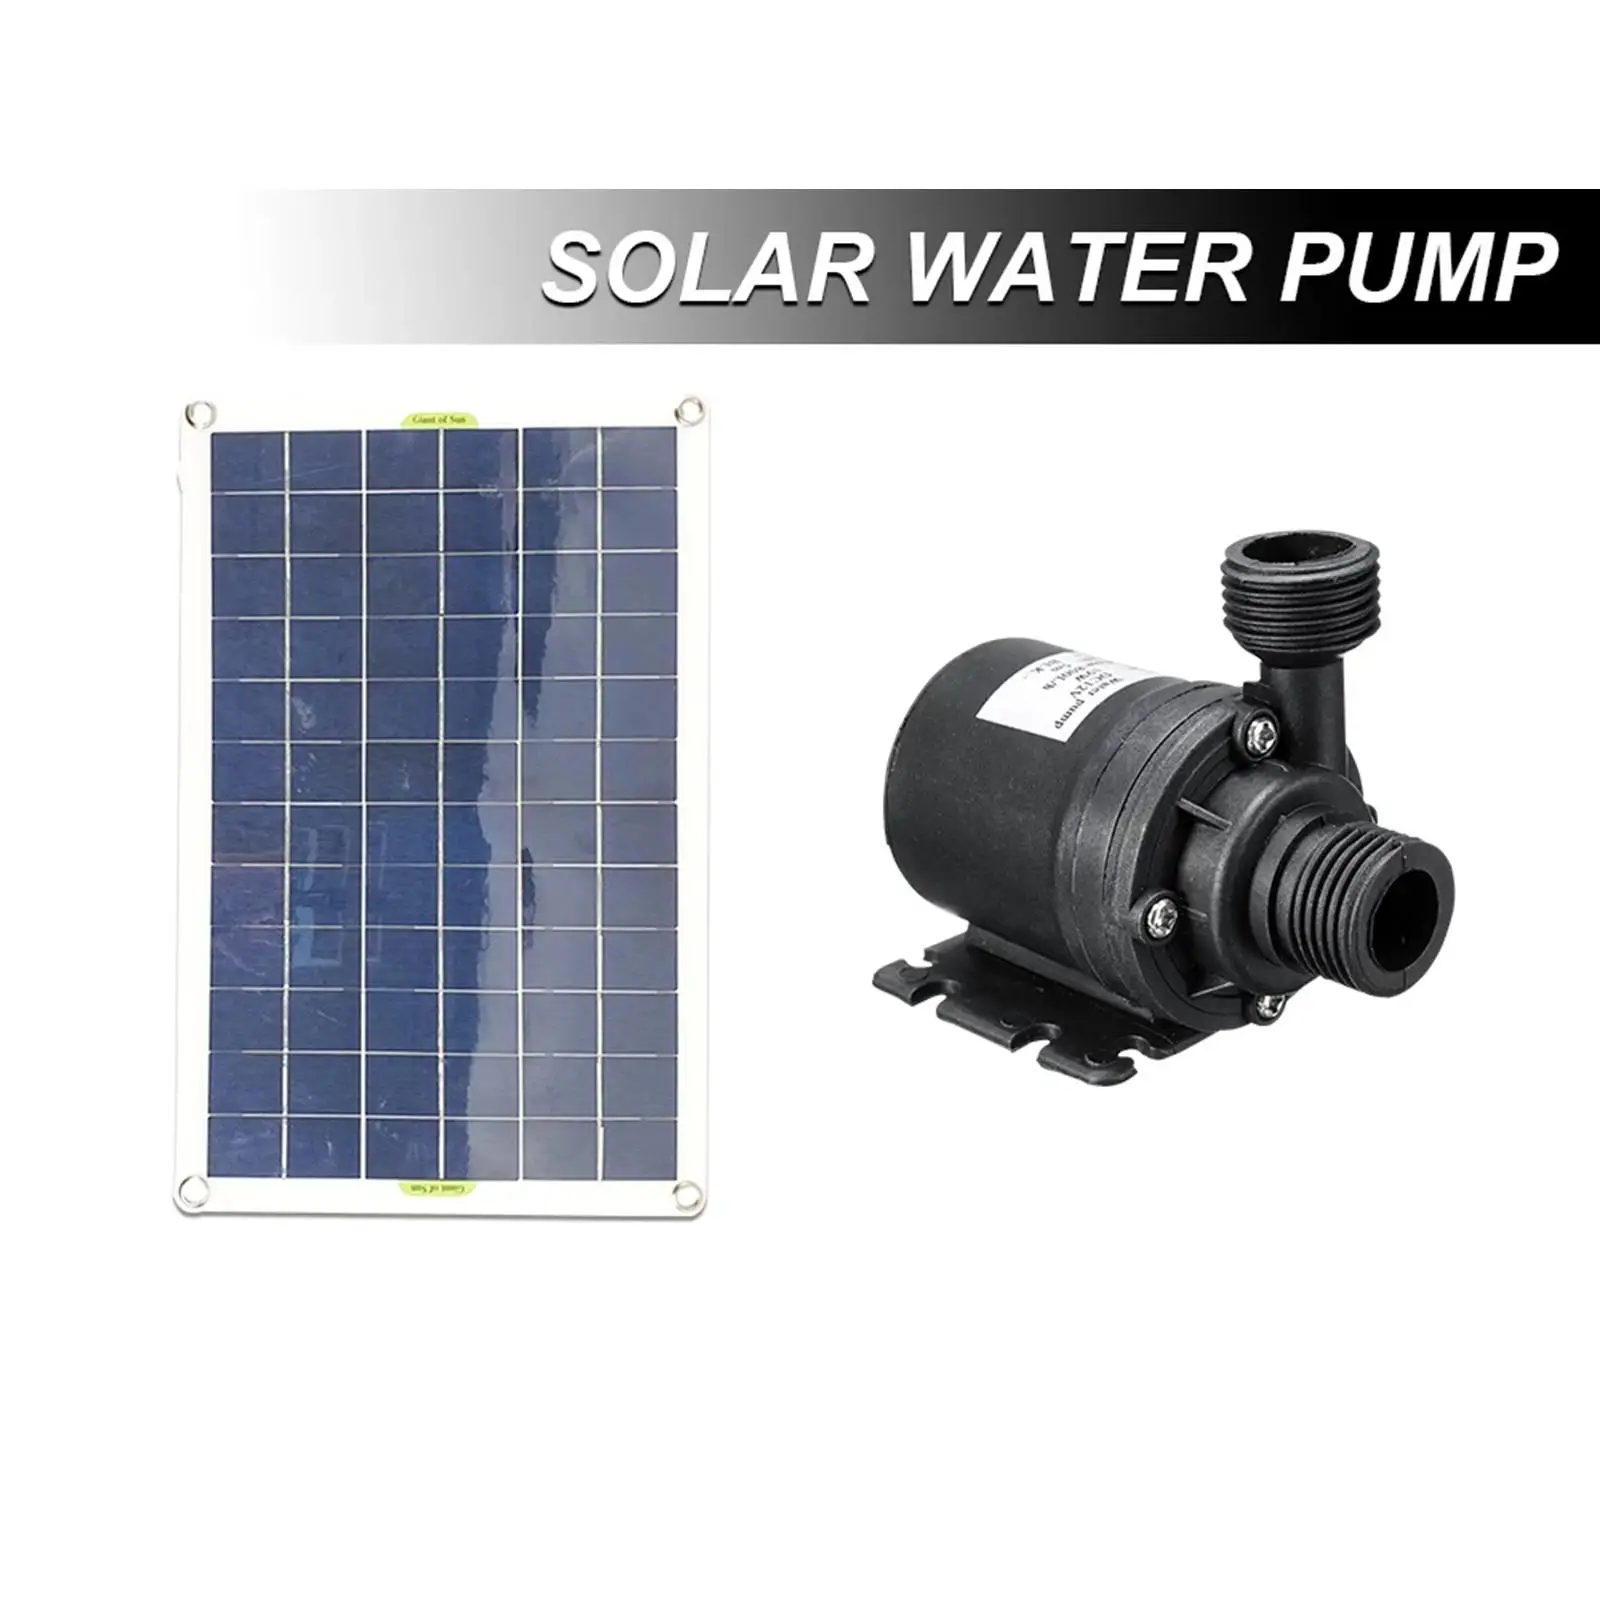 Solar Water Pump Watering Pond Pump Continuous Work Solar Power Fountain Pump for Fish Tank Pool Water Feature Travel